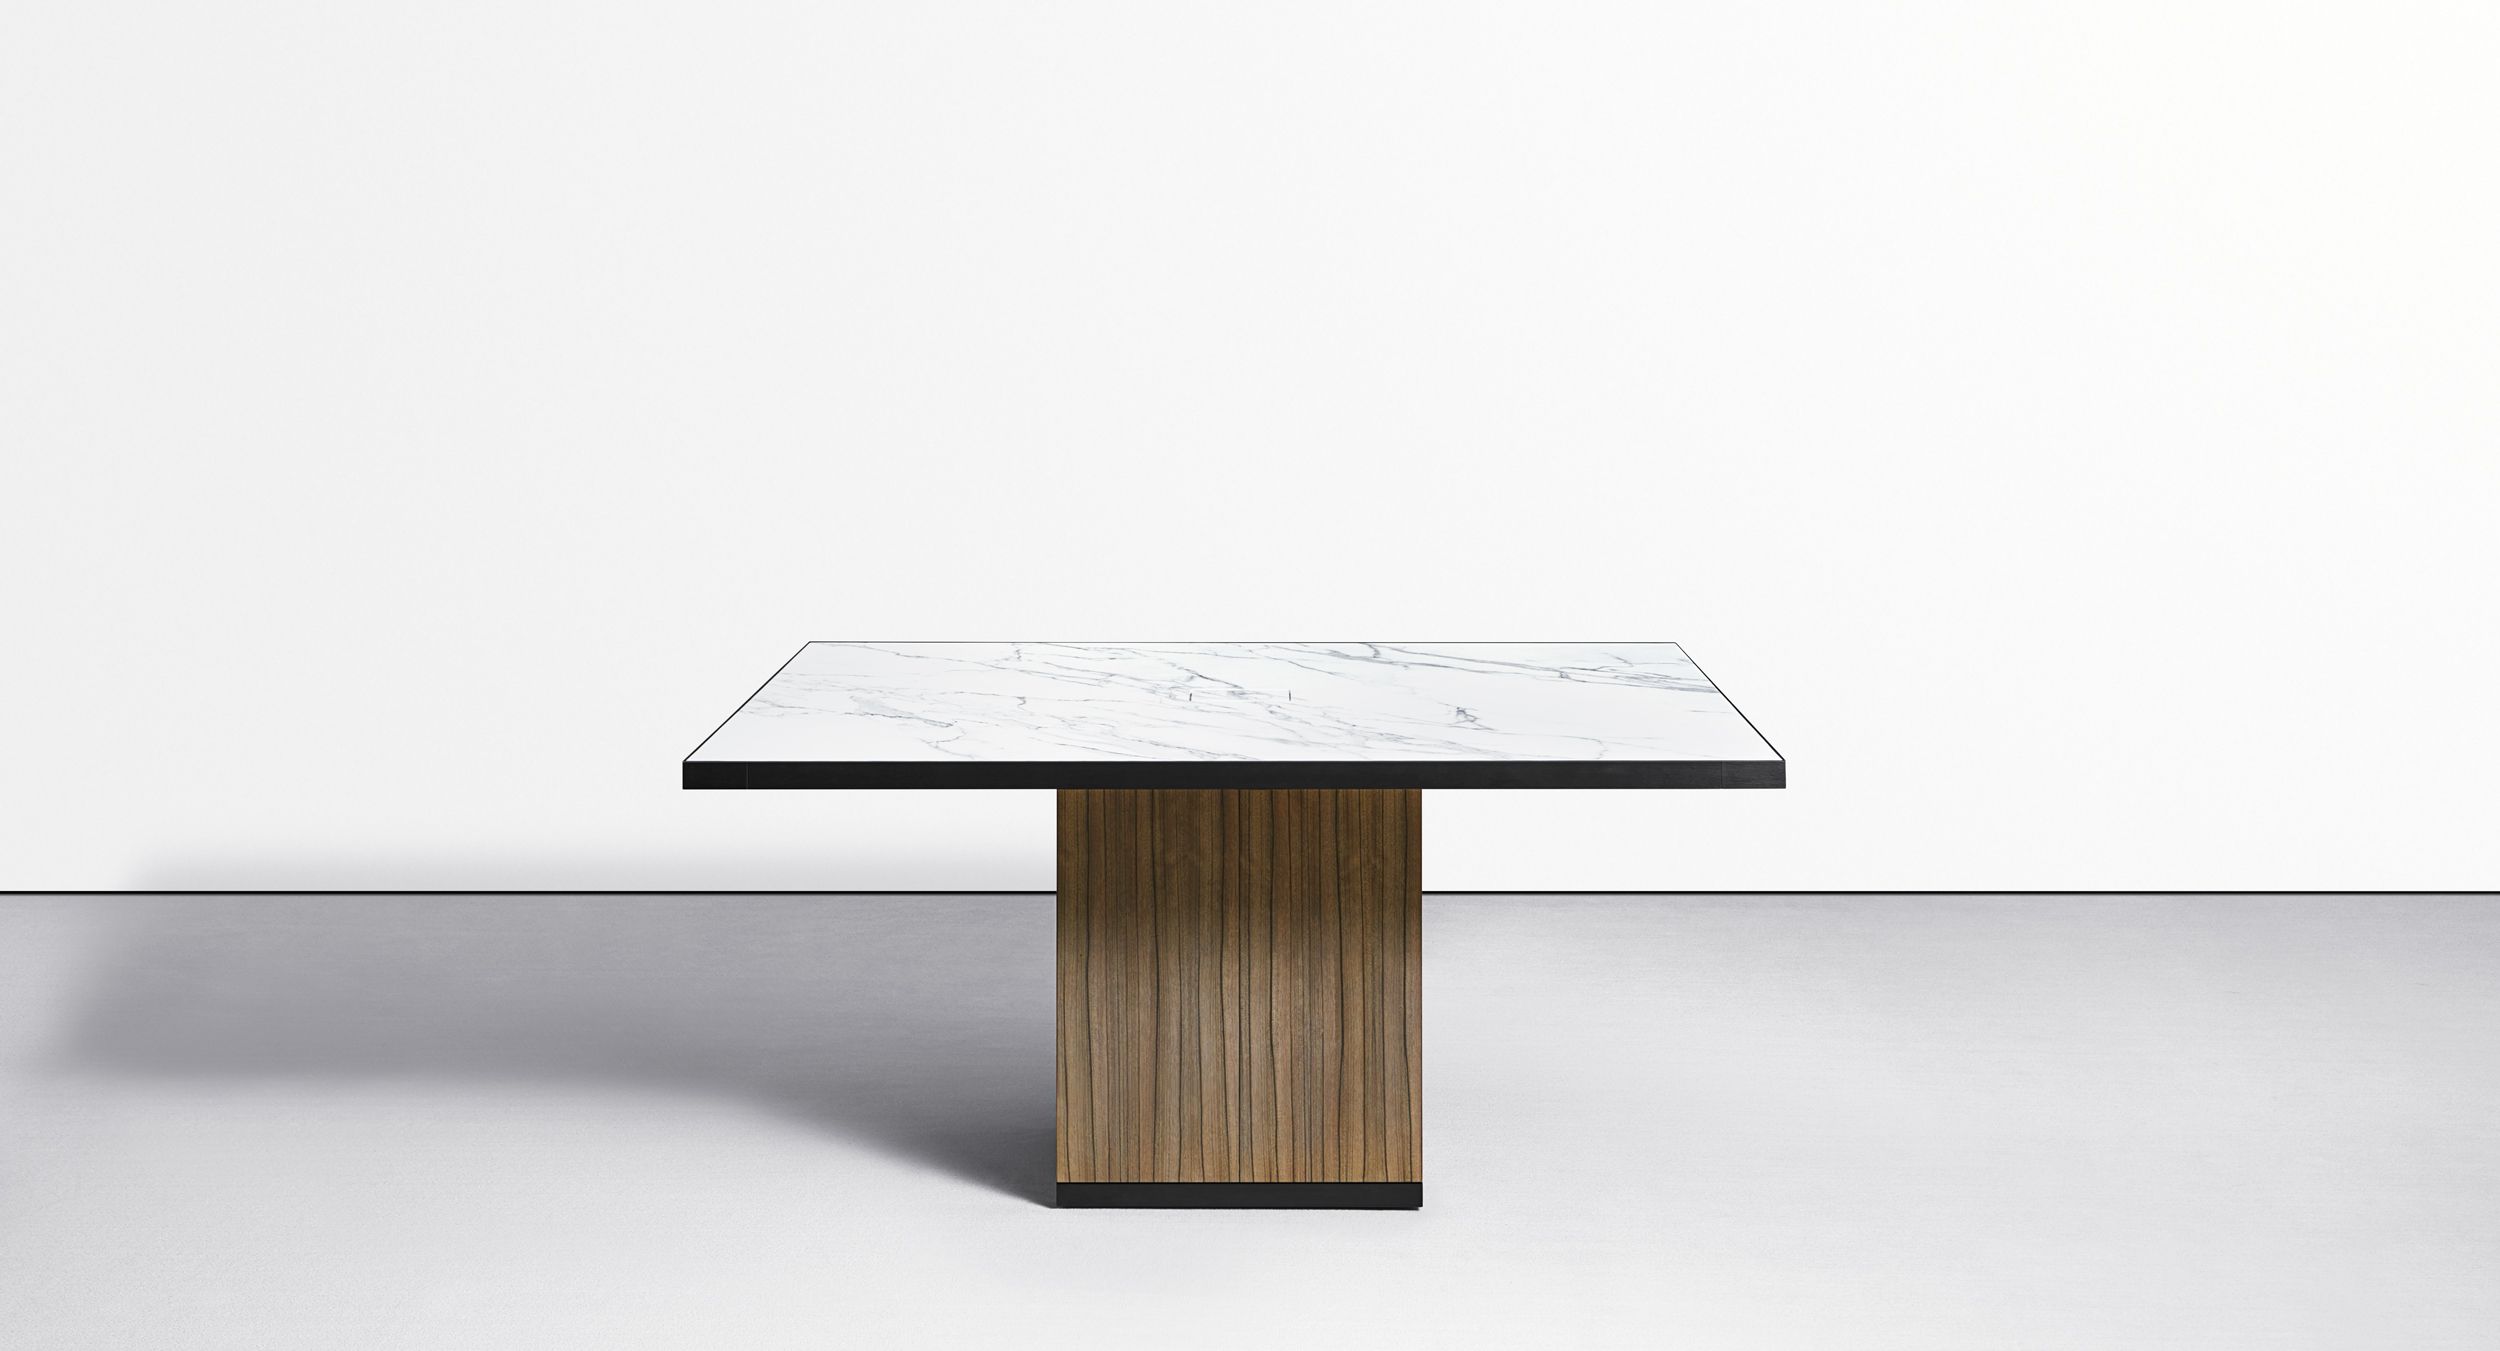 Motus² is the ultimate executive-level reconfigurable table.